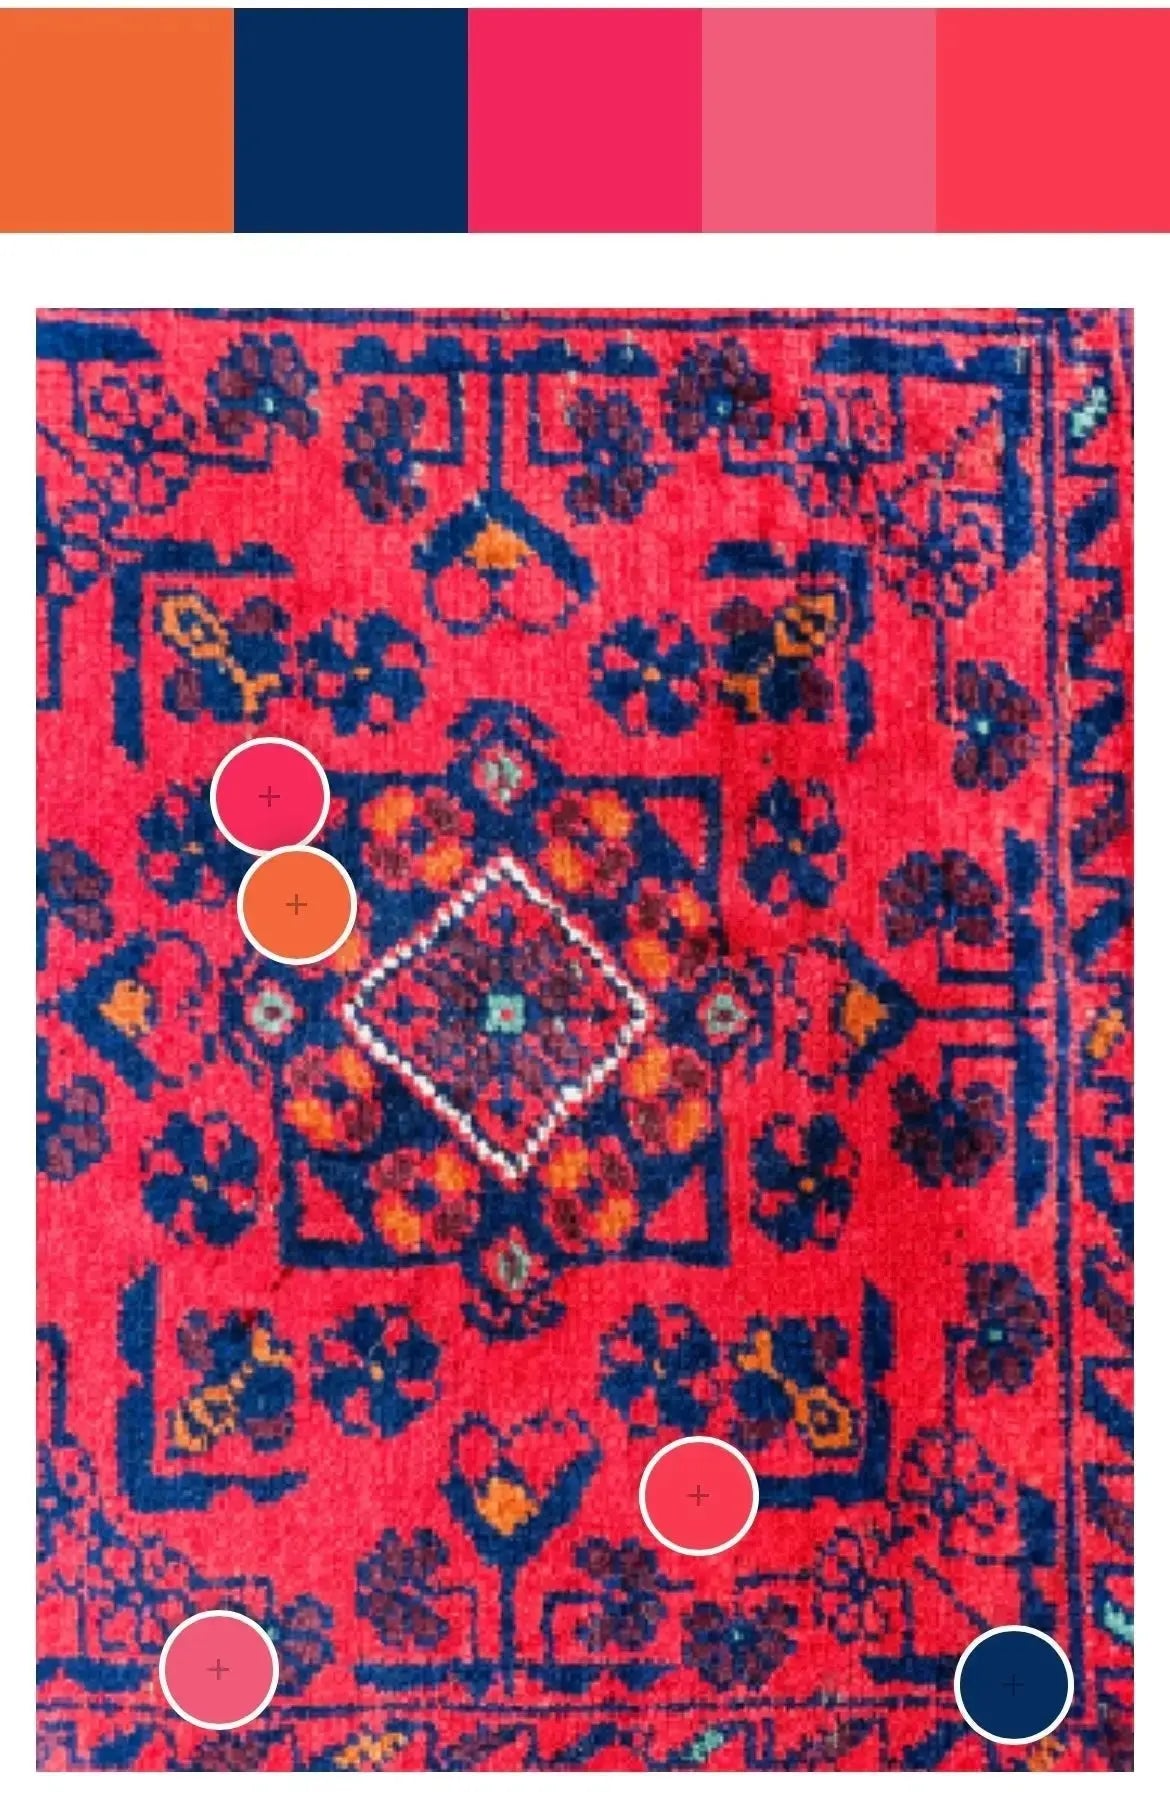 New Hand Knotted Runner # 3152 | 1’ 7” x 5’ 4” - Krazy For Rugs